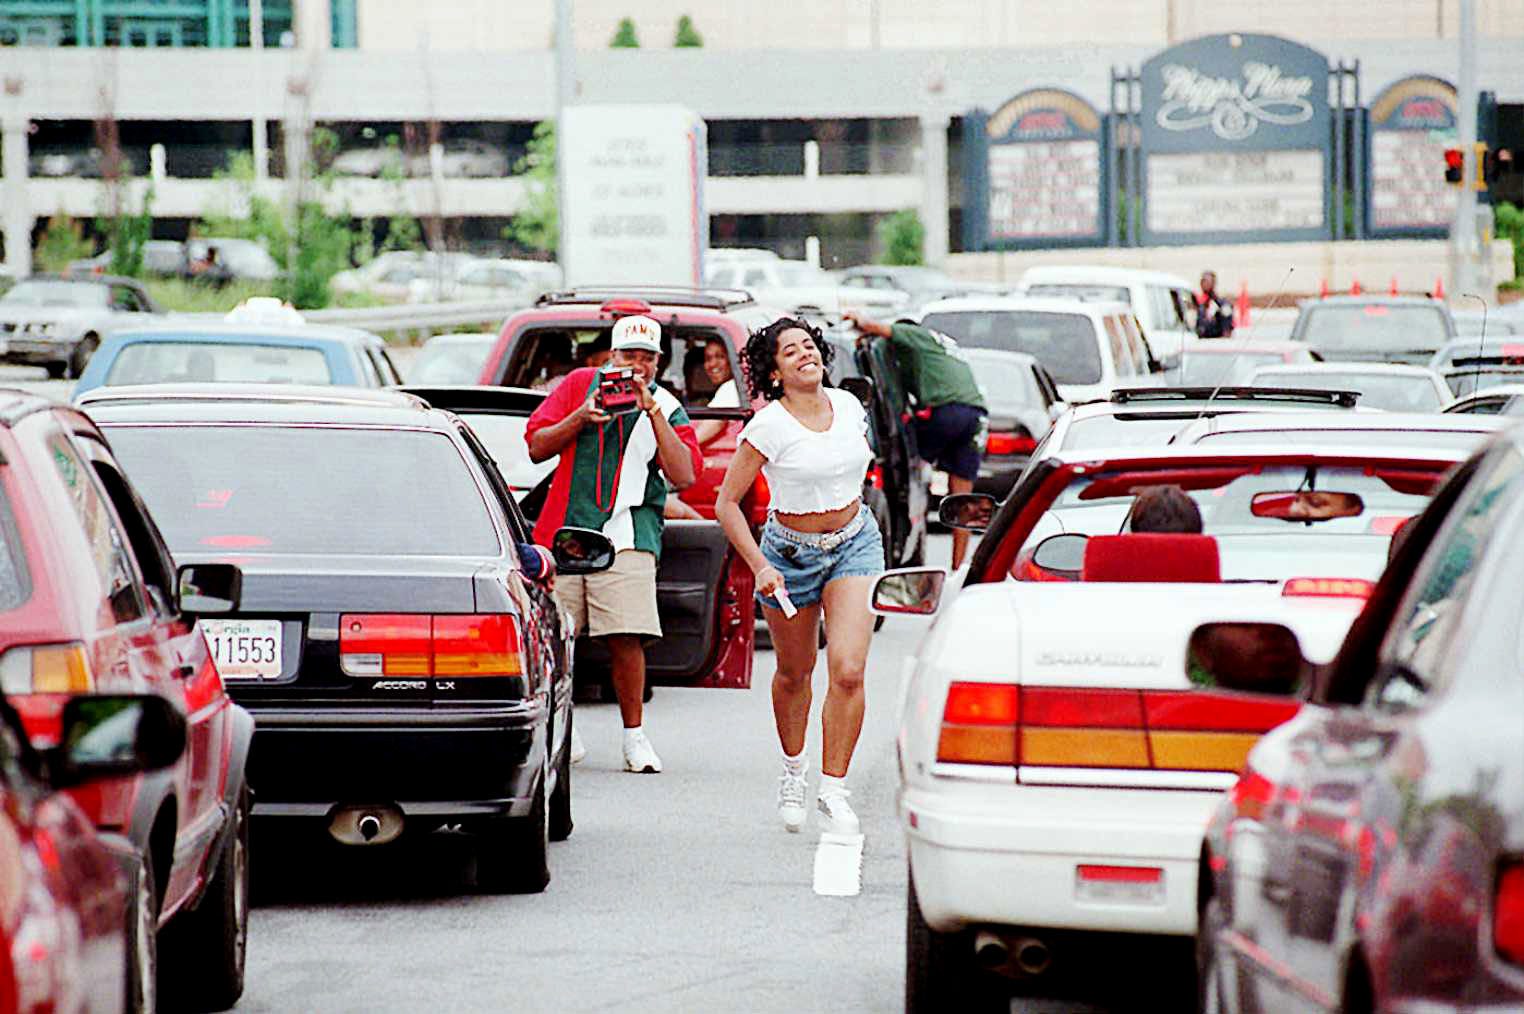 Woman running back to her car in the middle of traffic jam. She's carrying a Polaroid in her hand.